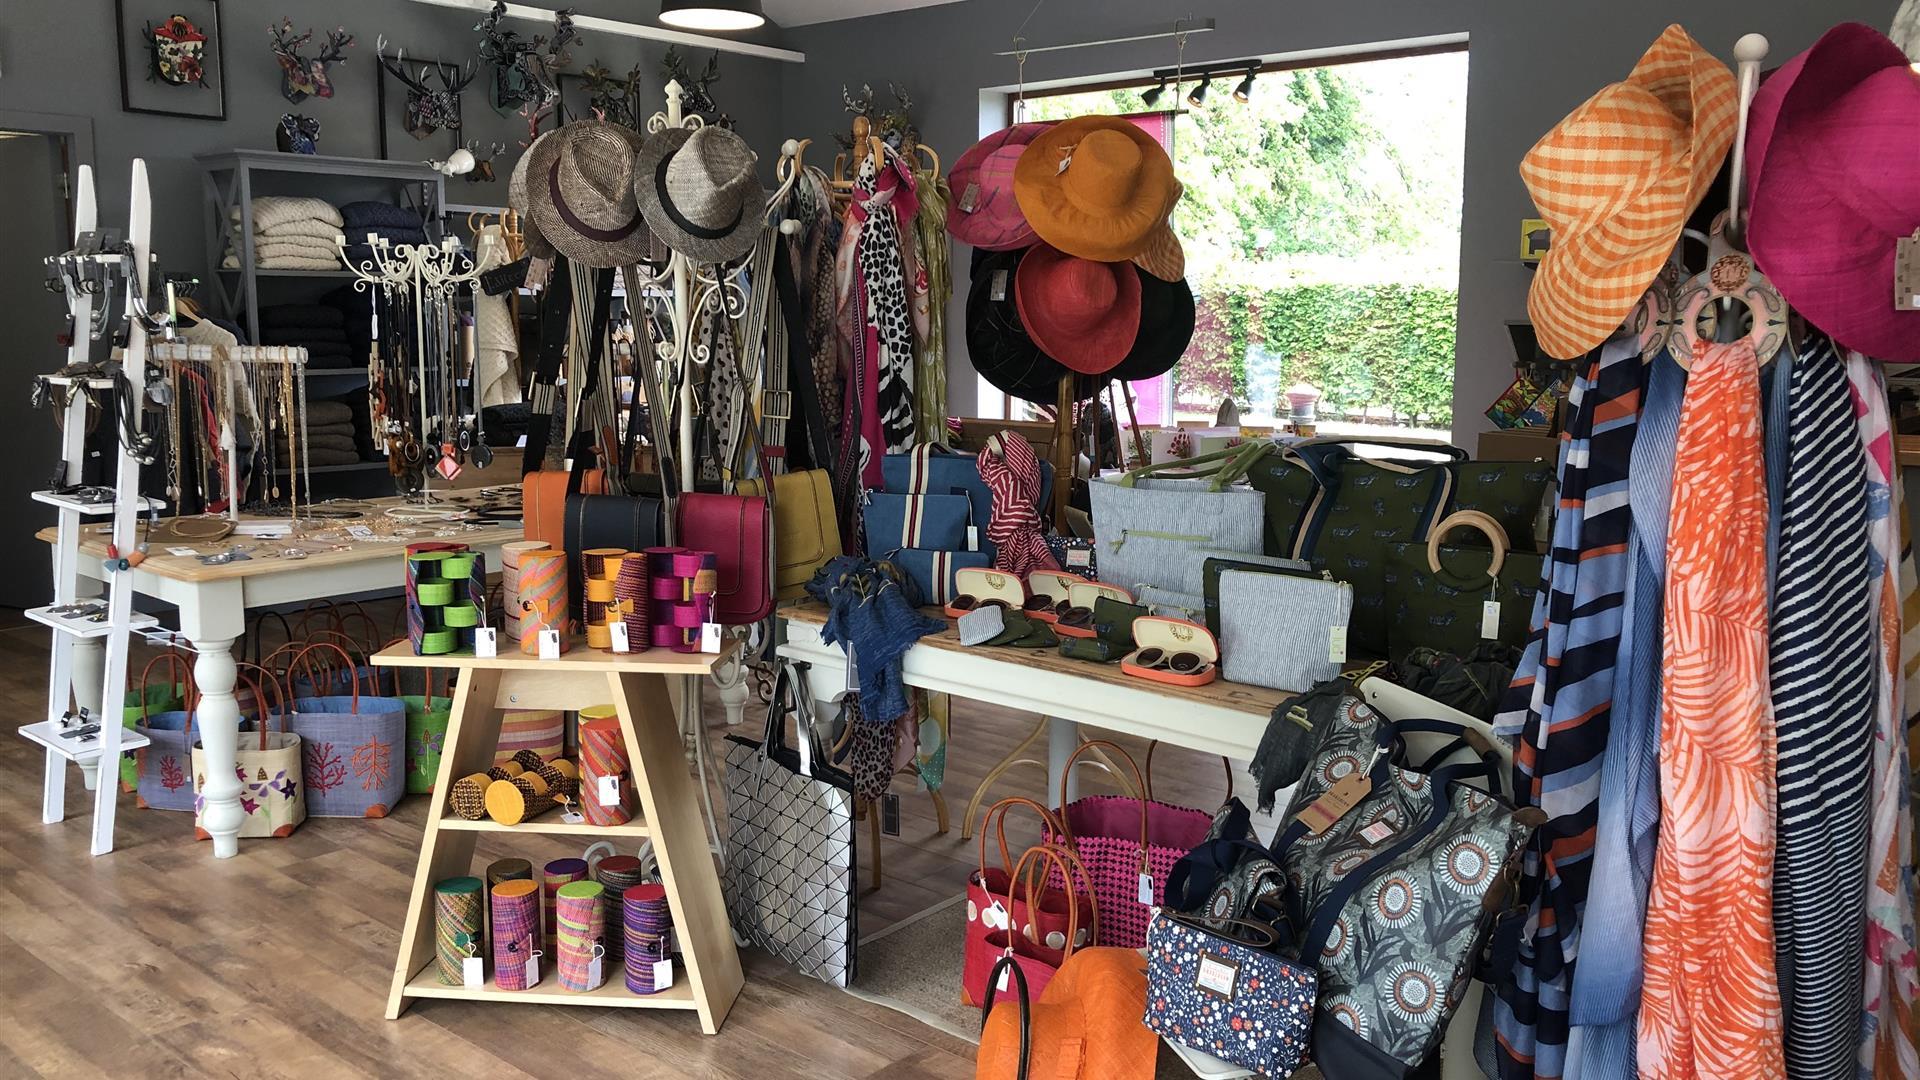 Shop with displays of hats, scarves, jewellery, handbags and more